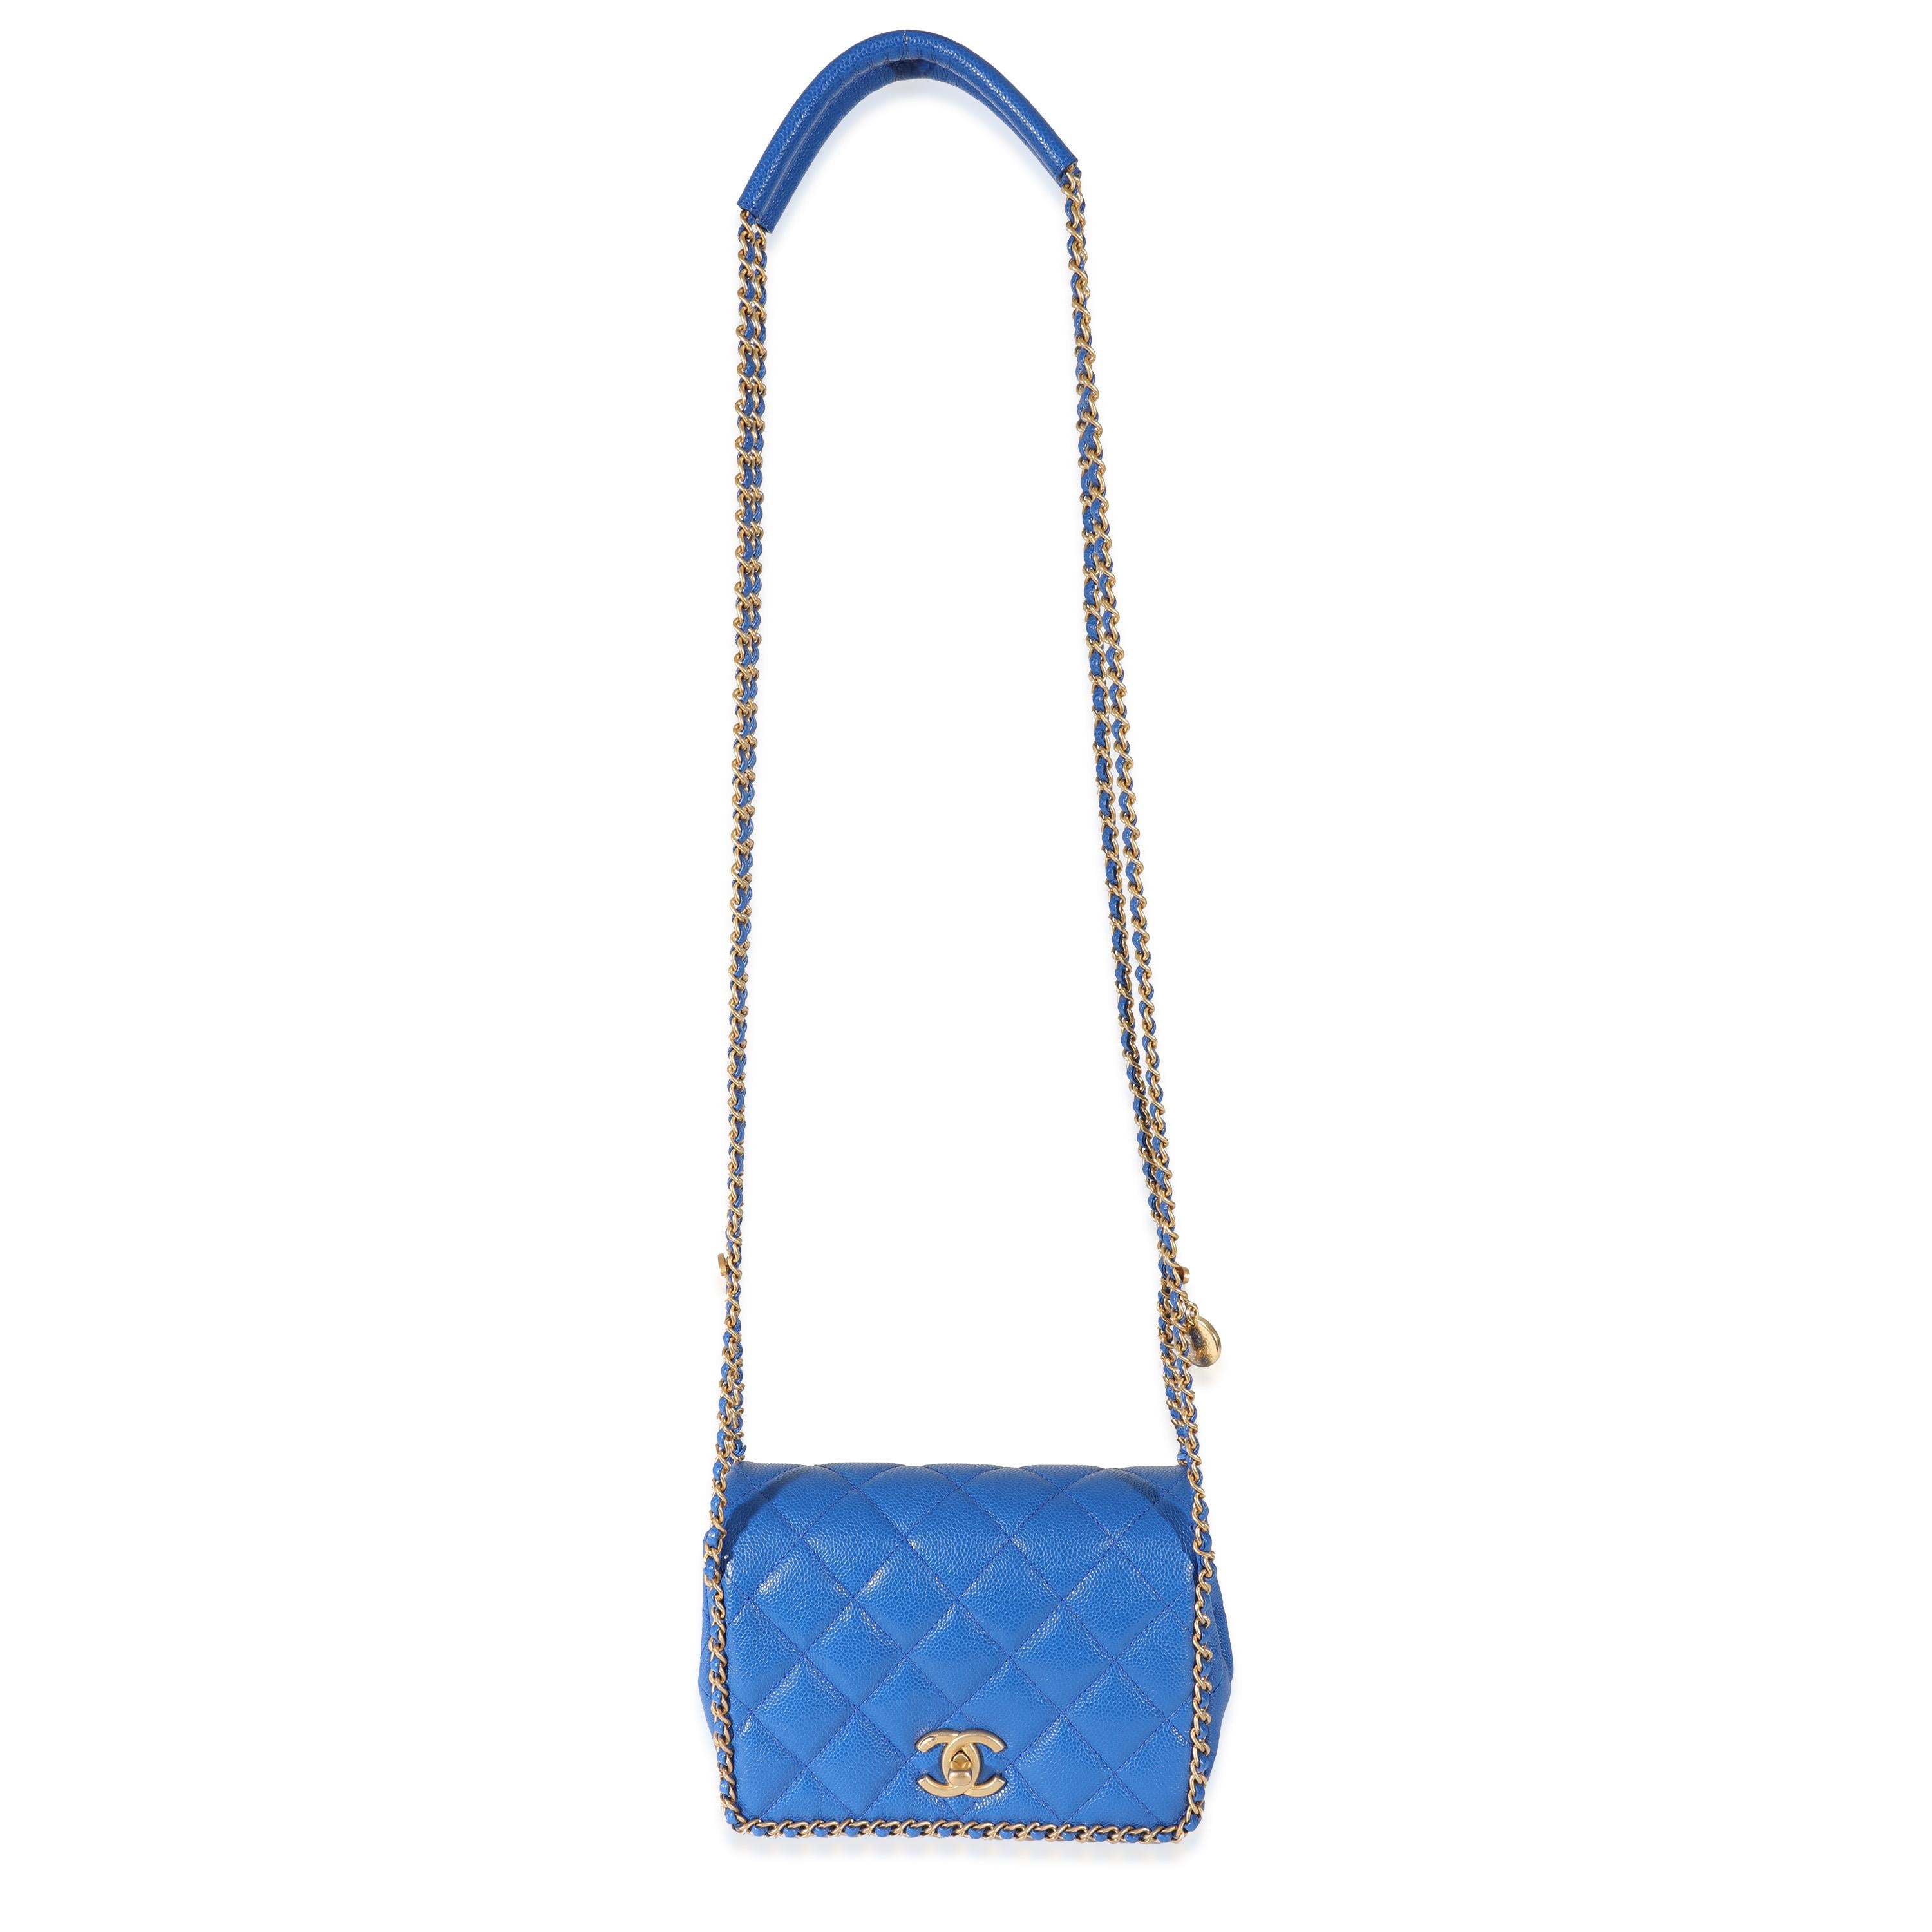 Listing Title: Chanel 22B Dark Blue Caviar Chain Around Flap Bag
SKU: 130341
MSRP: 4600.00
Condition: Pre-owned 
Condition Description: A timeless classic that never goes out of style, the flap bag from Chanel dates back to 1955 and has seen a